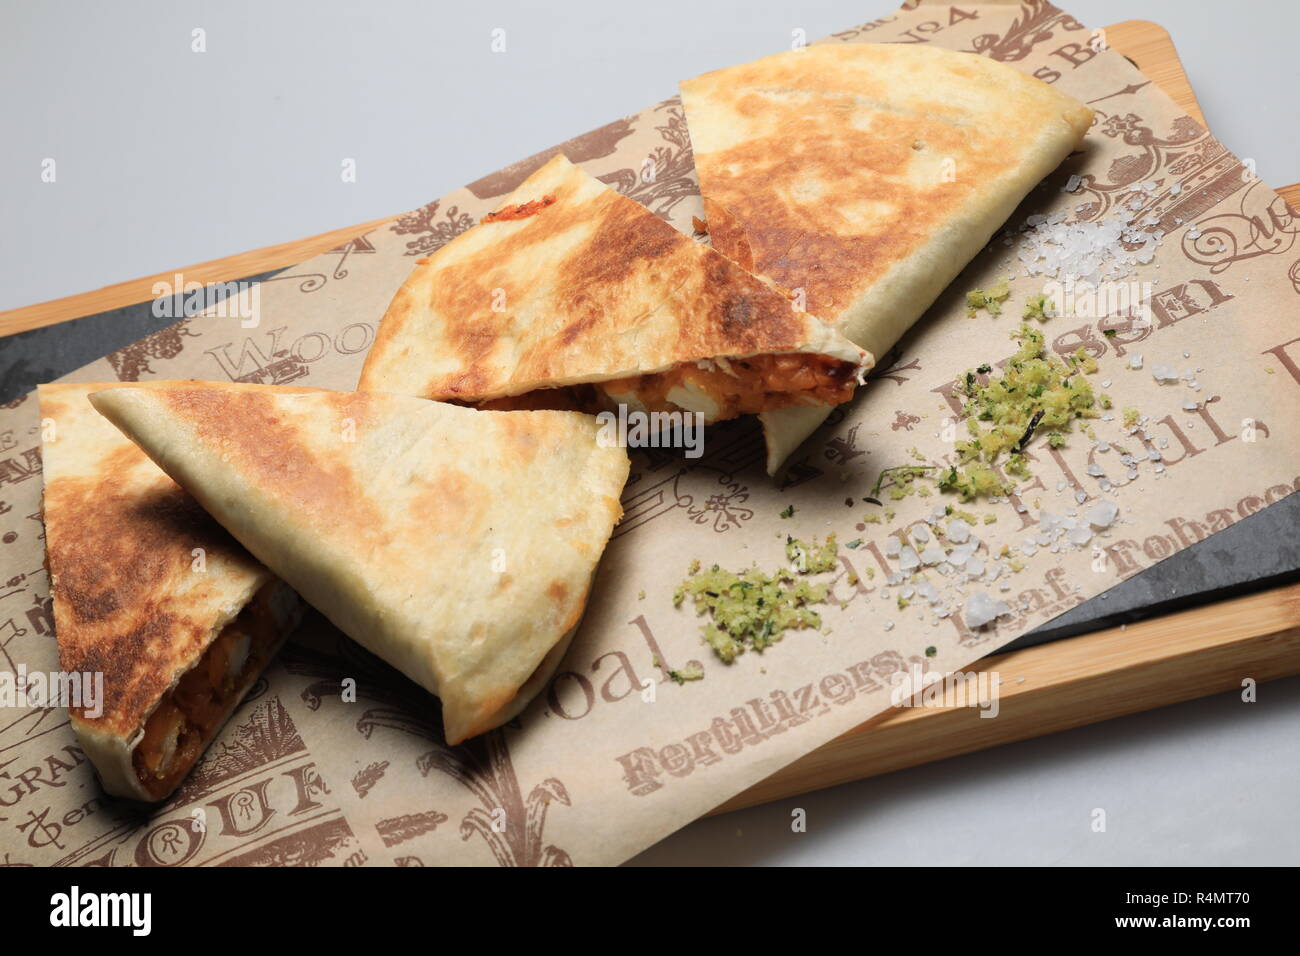 A shot of a tortilla sandwich cut in several pieces Stock Photo